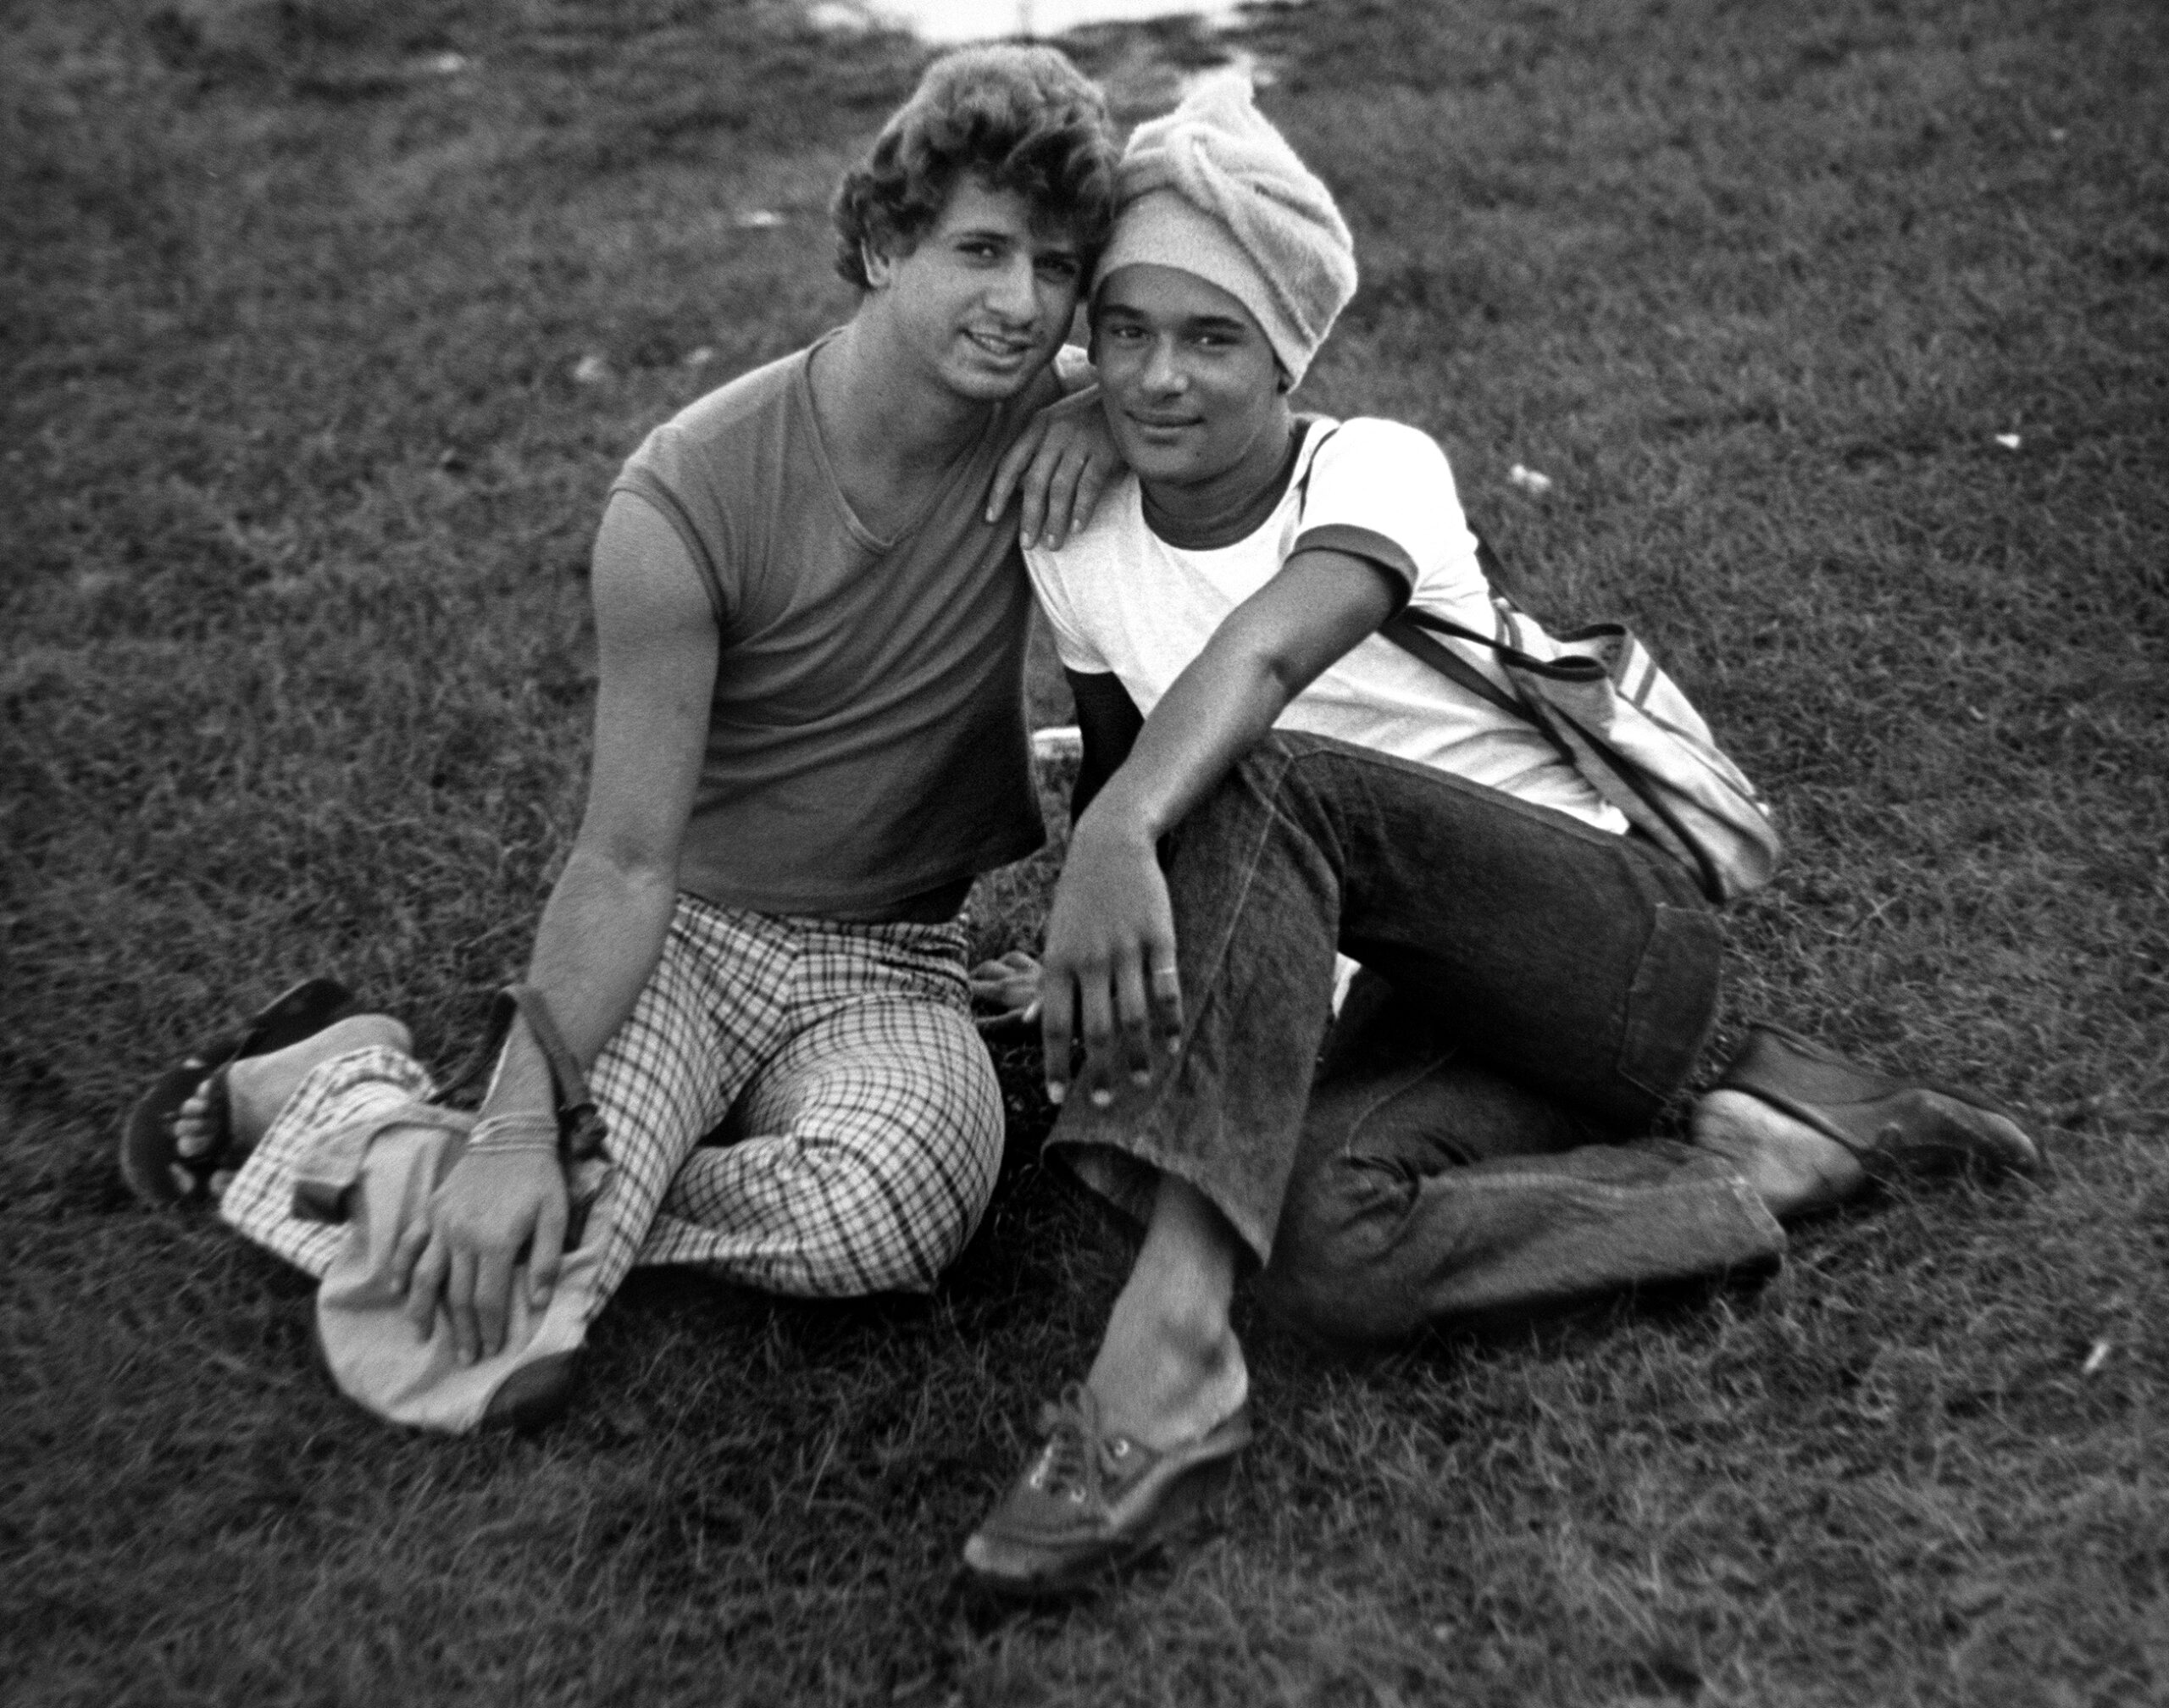 Two Cuban refugees pose, sitting on the grass